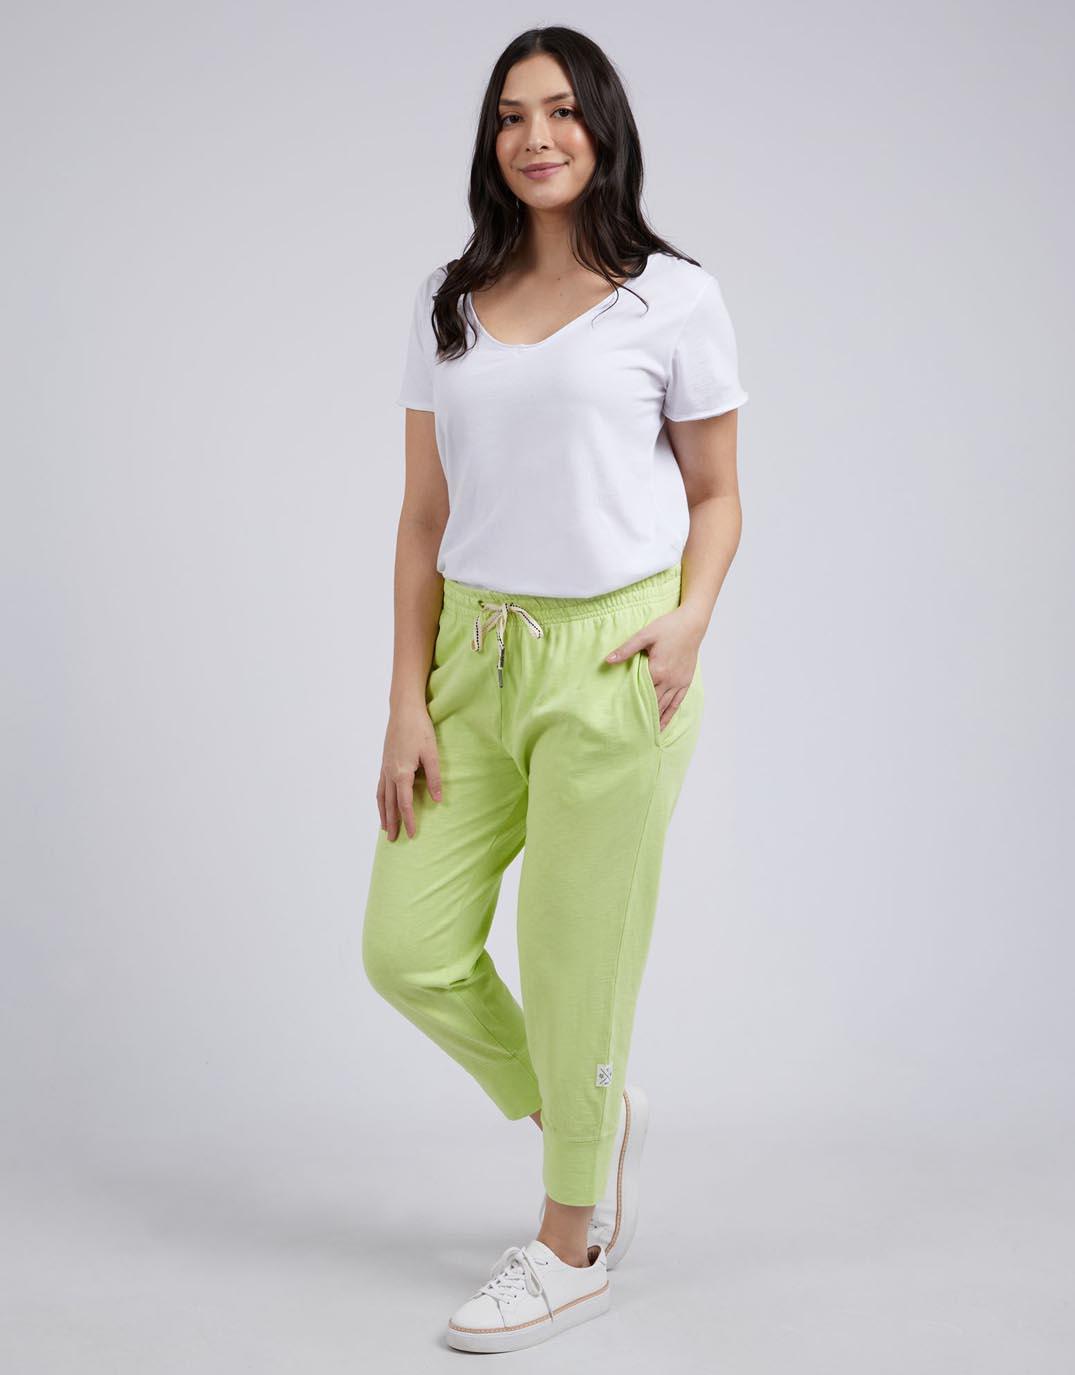 ZAYDA- 3/4 Pants with Buttons - Harmonygirl.com